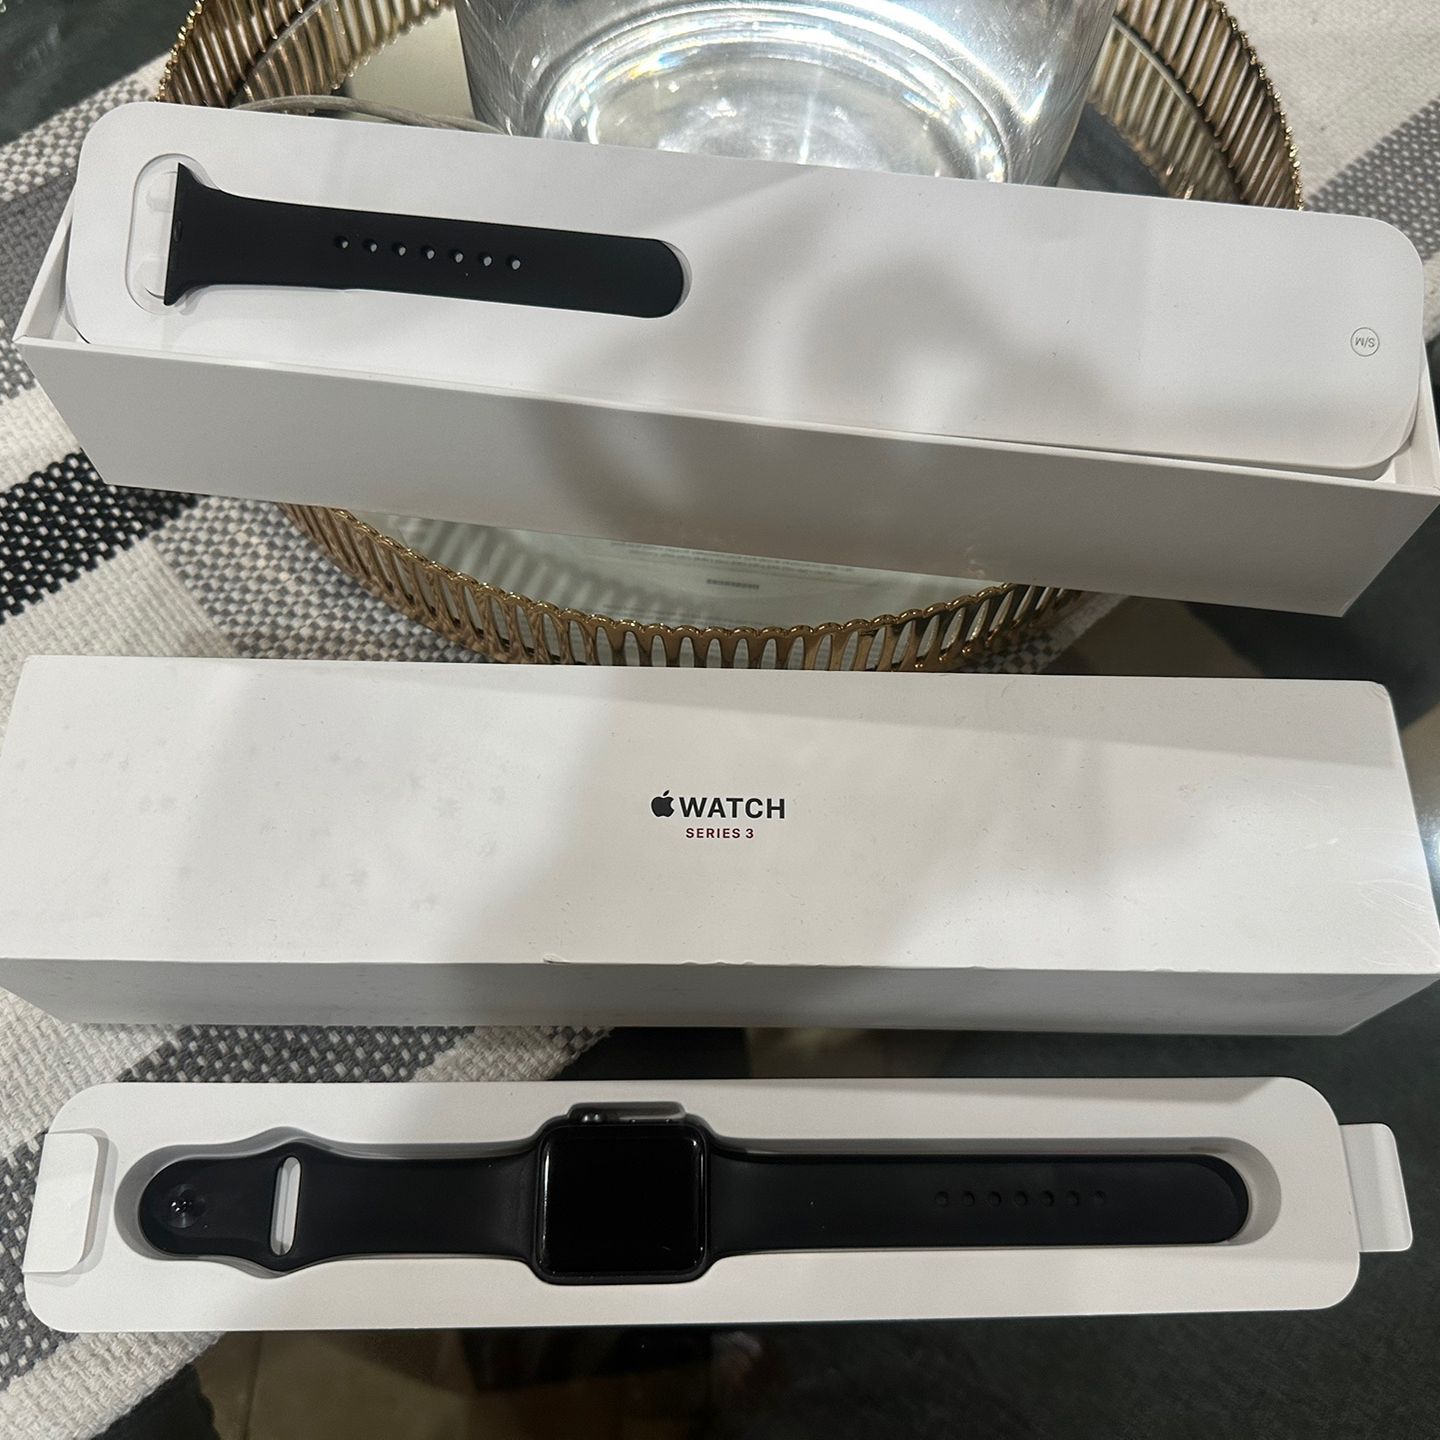 Apple watch series 3 only $100 (great conditions)